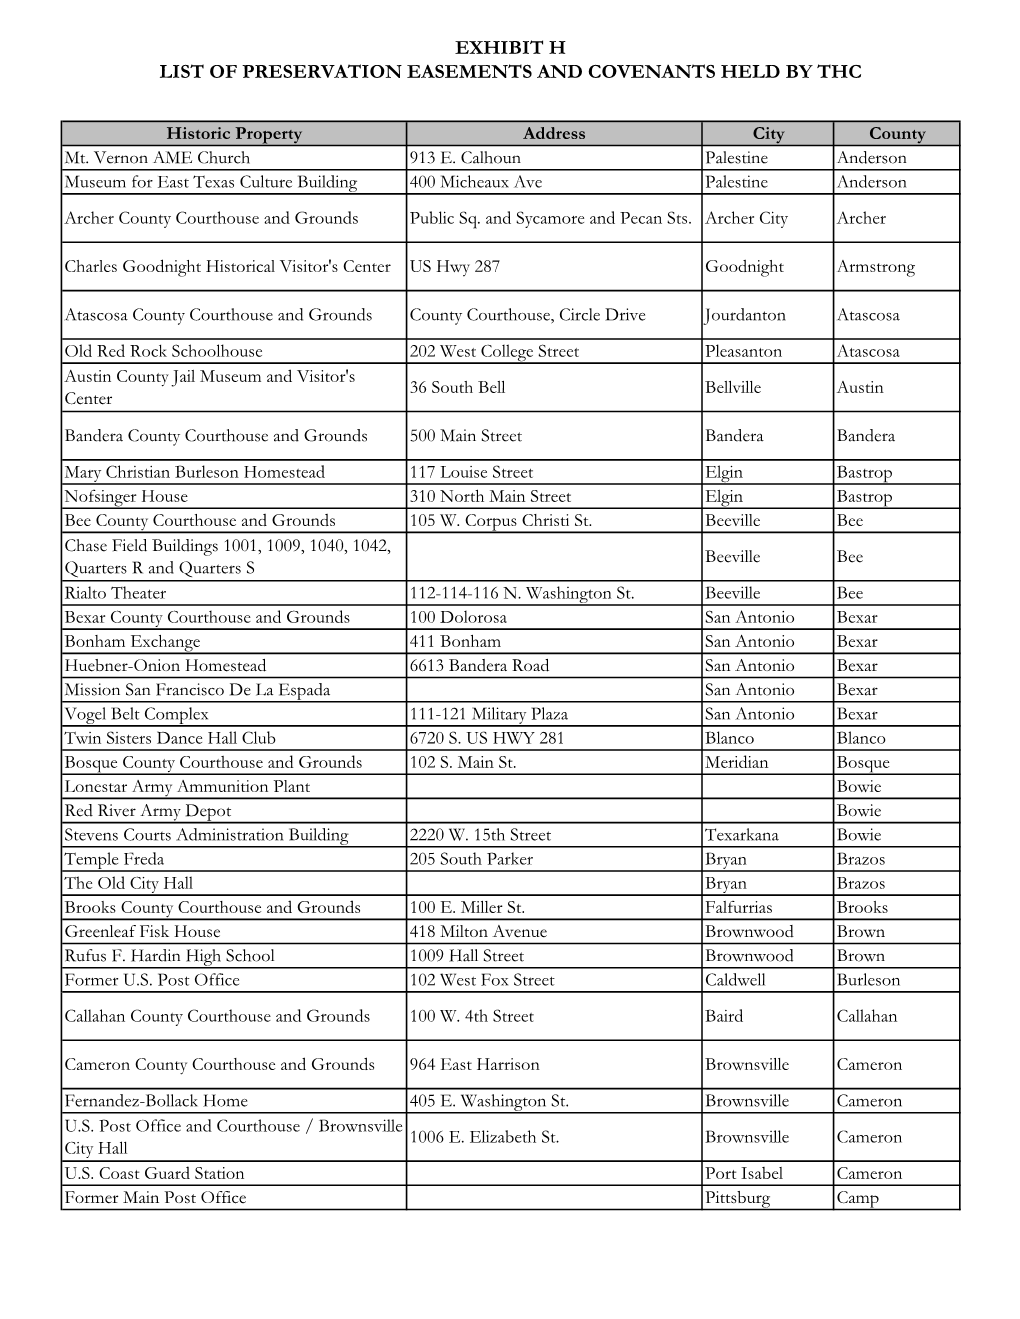 Exhibit H List of Preservation Easements and Covenants Held by Thc